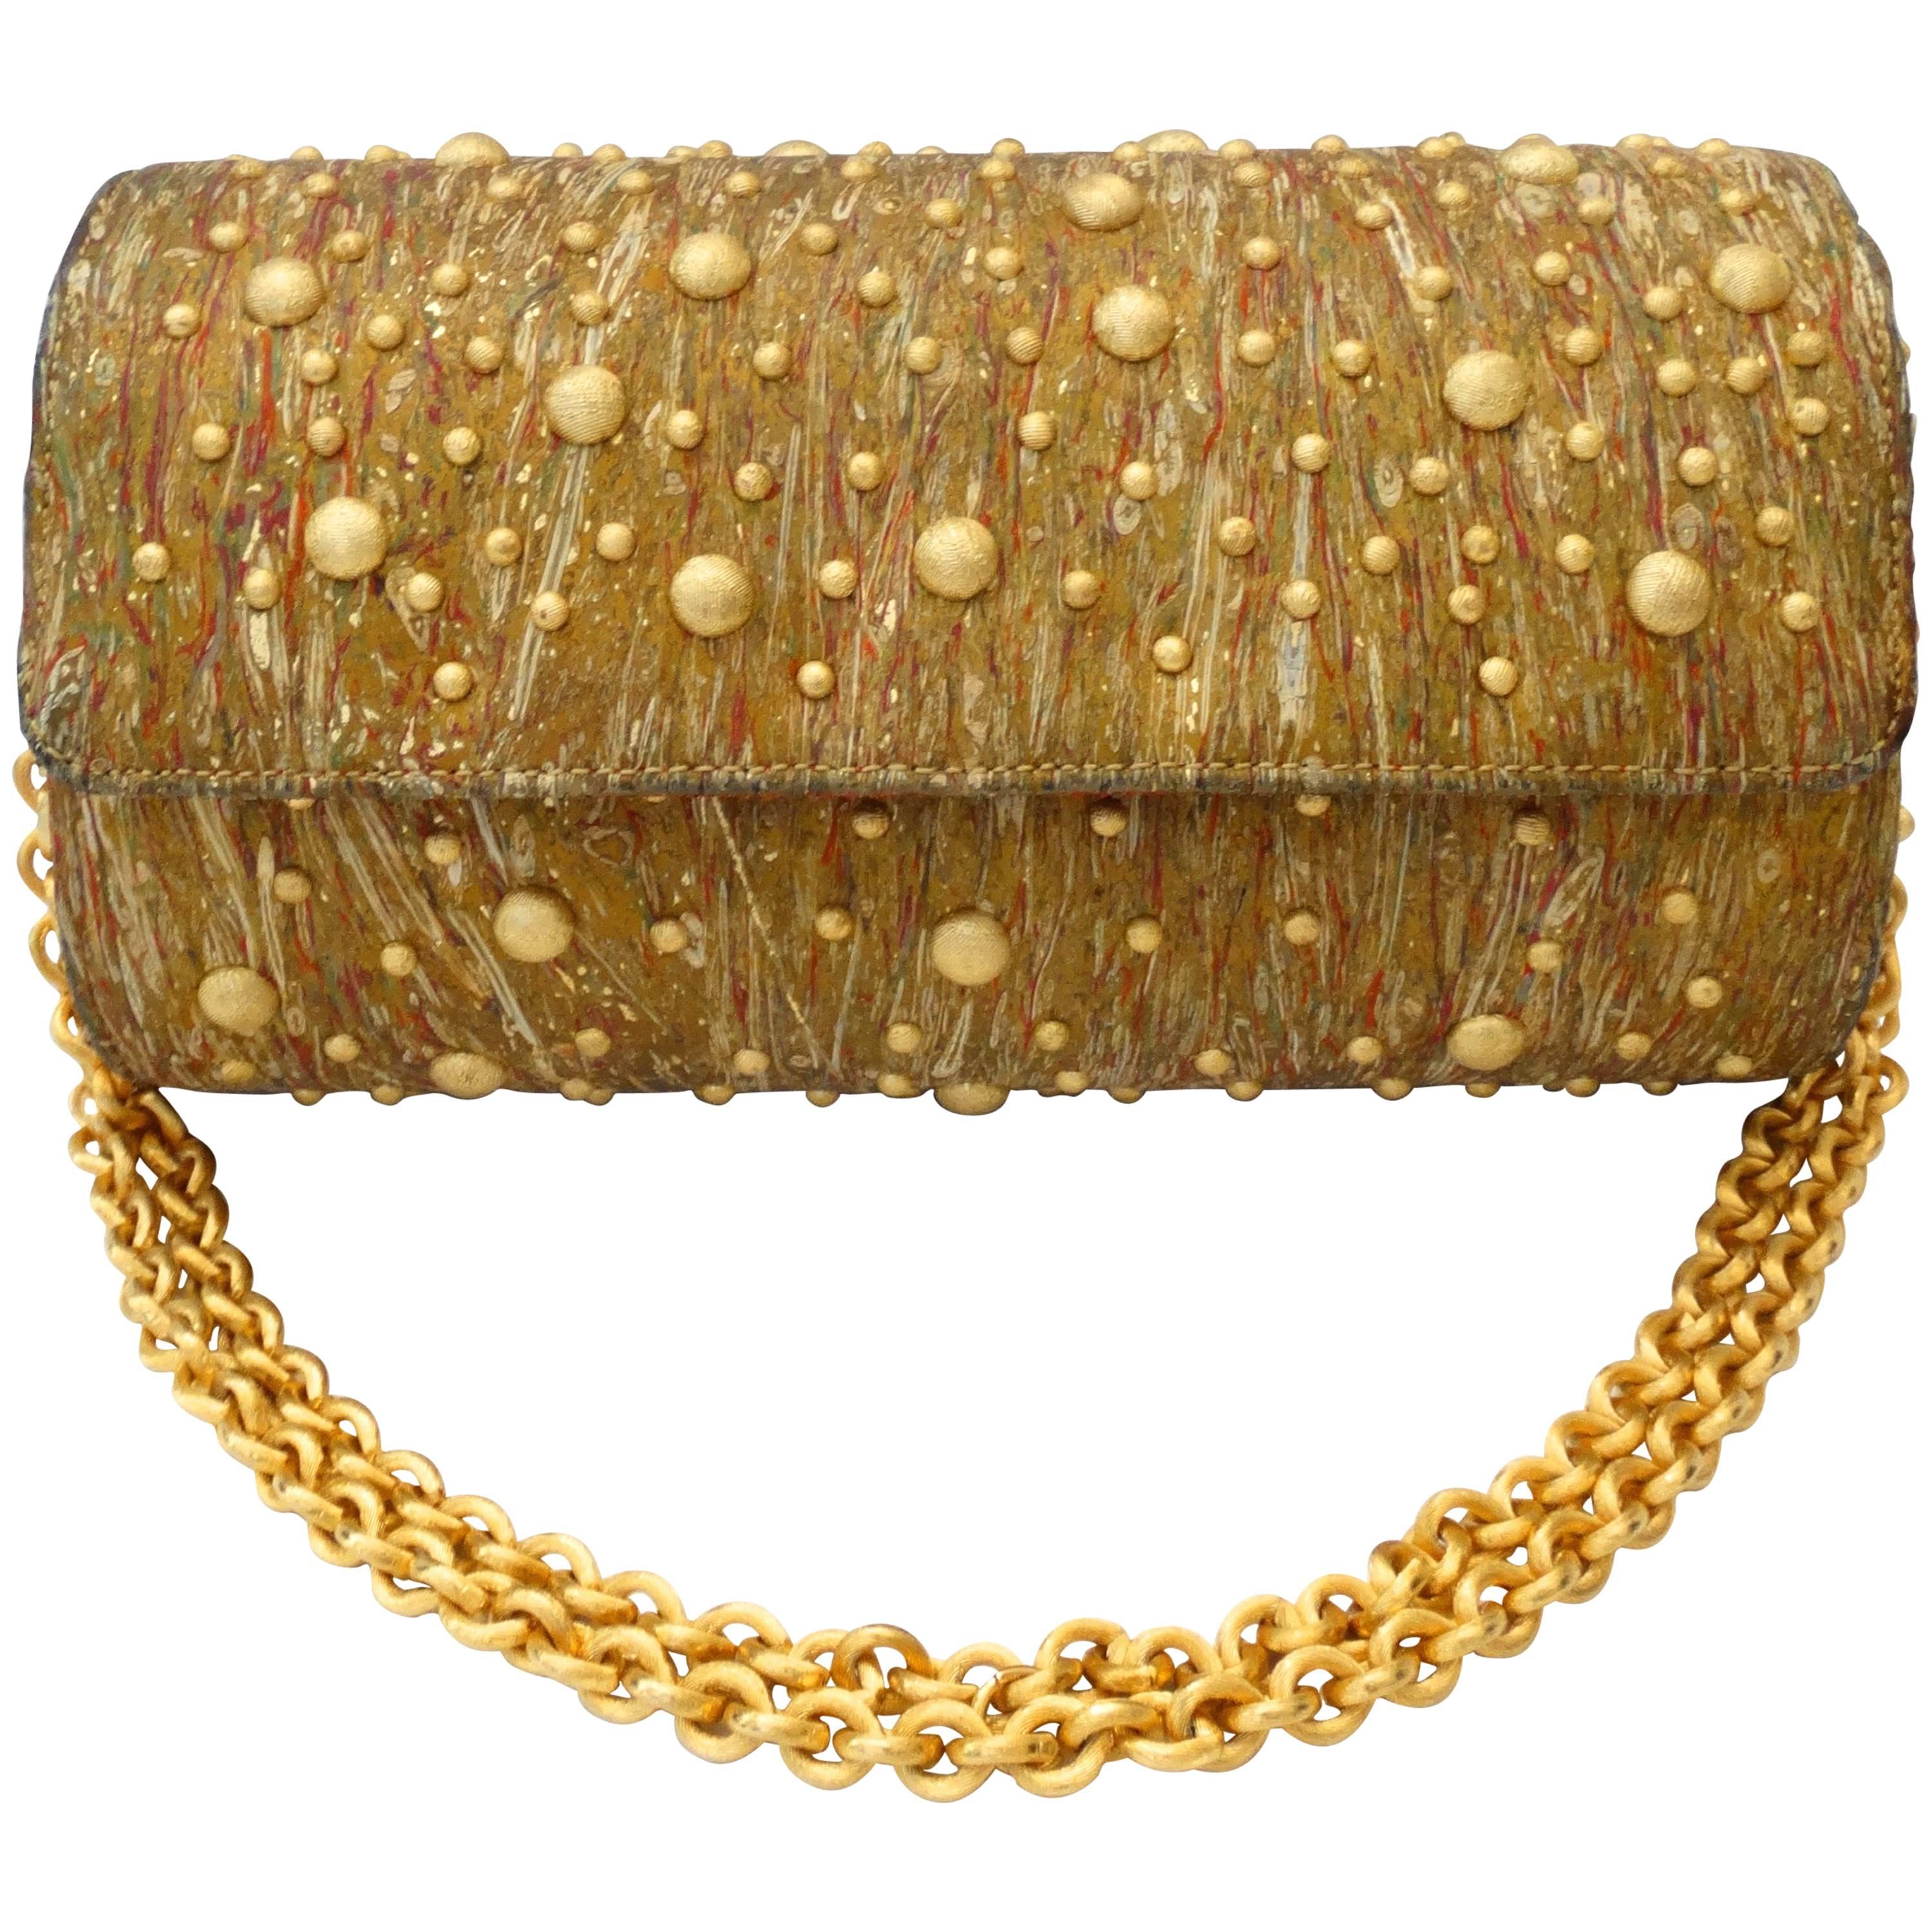 1980s Studded Gold Marble Painted Evening Bag